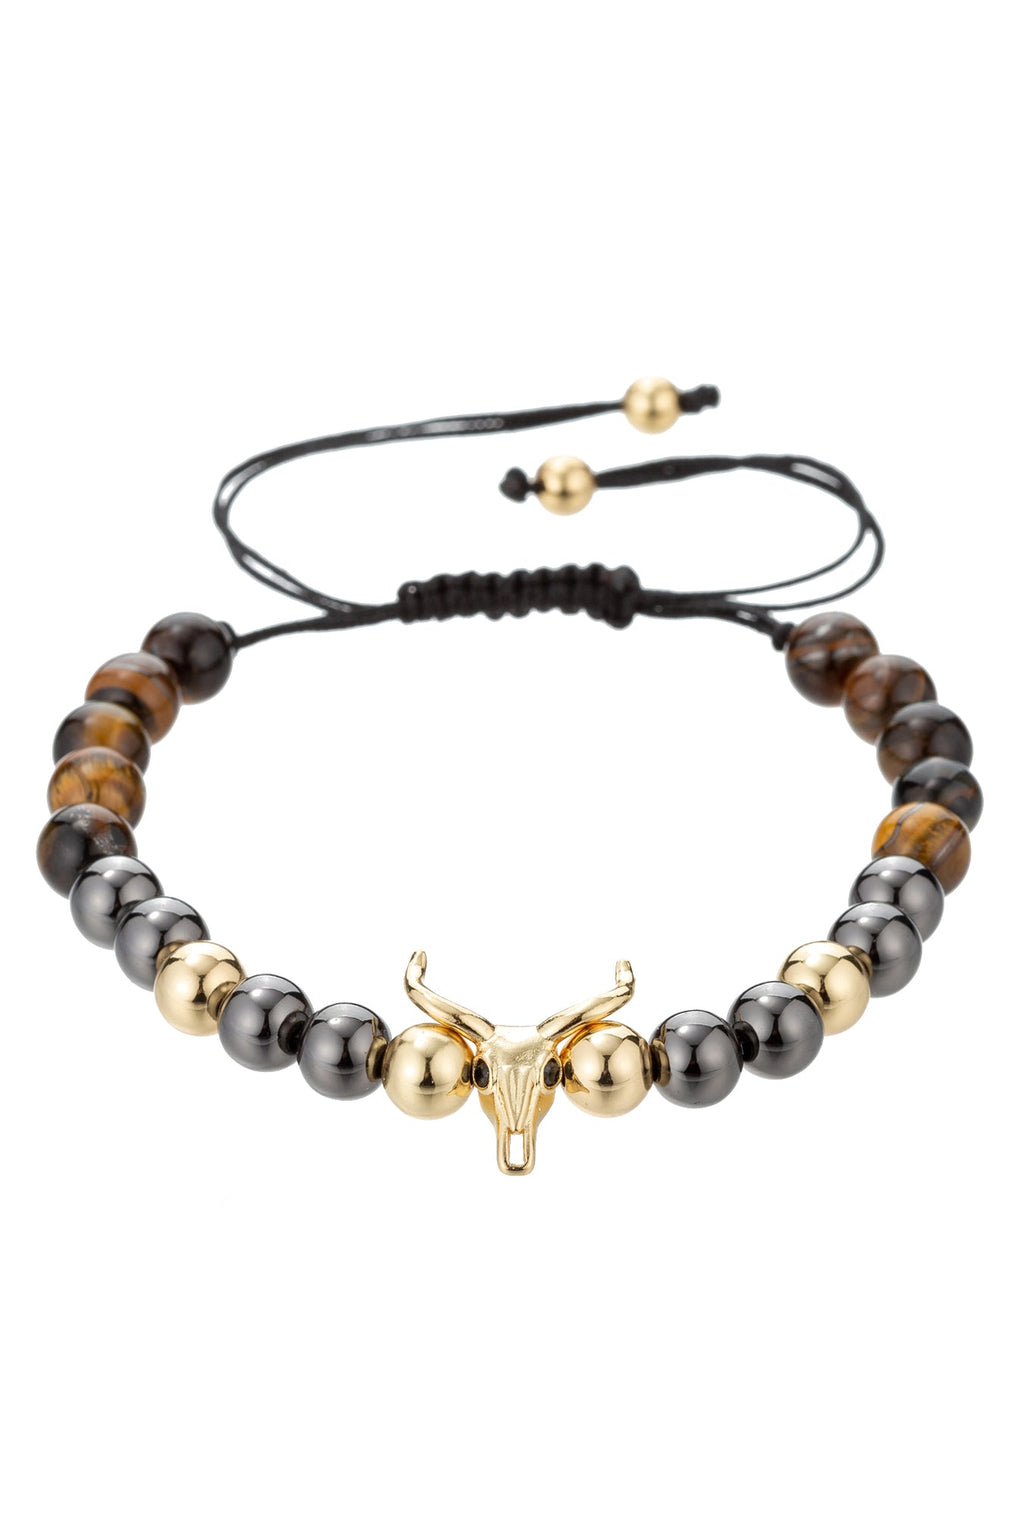 Elevate Your Style and Spirit with a Tiger Eye Beaded Adjustable Bracelet.